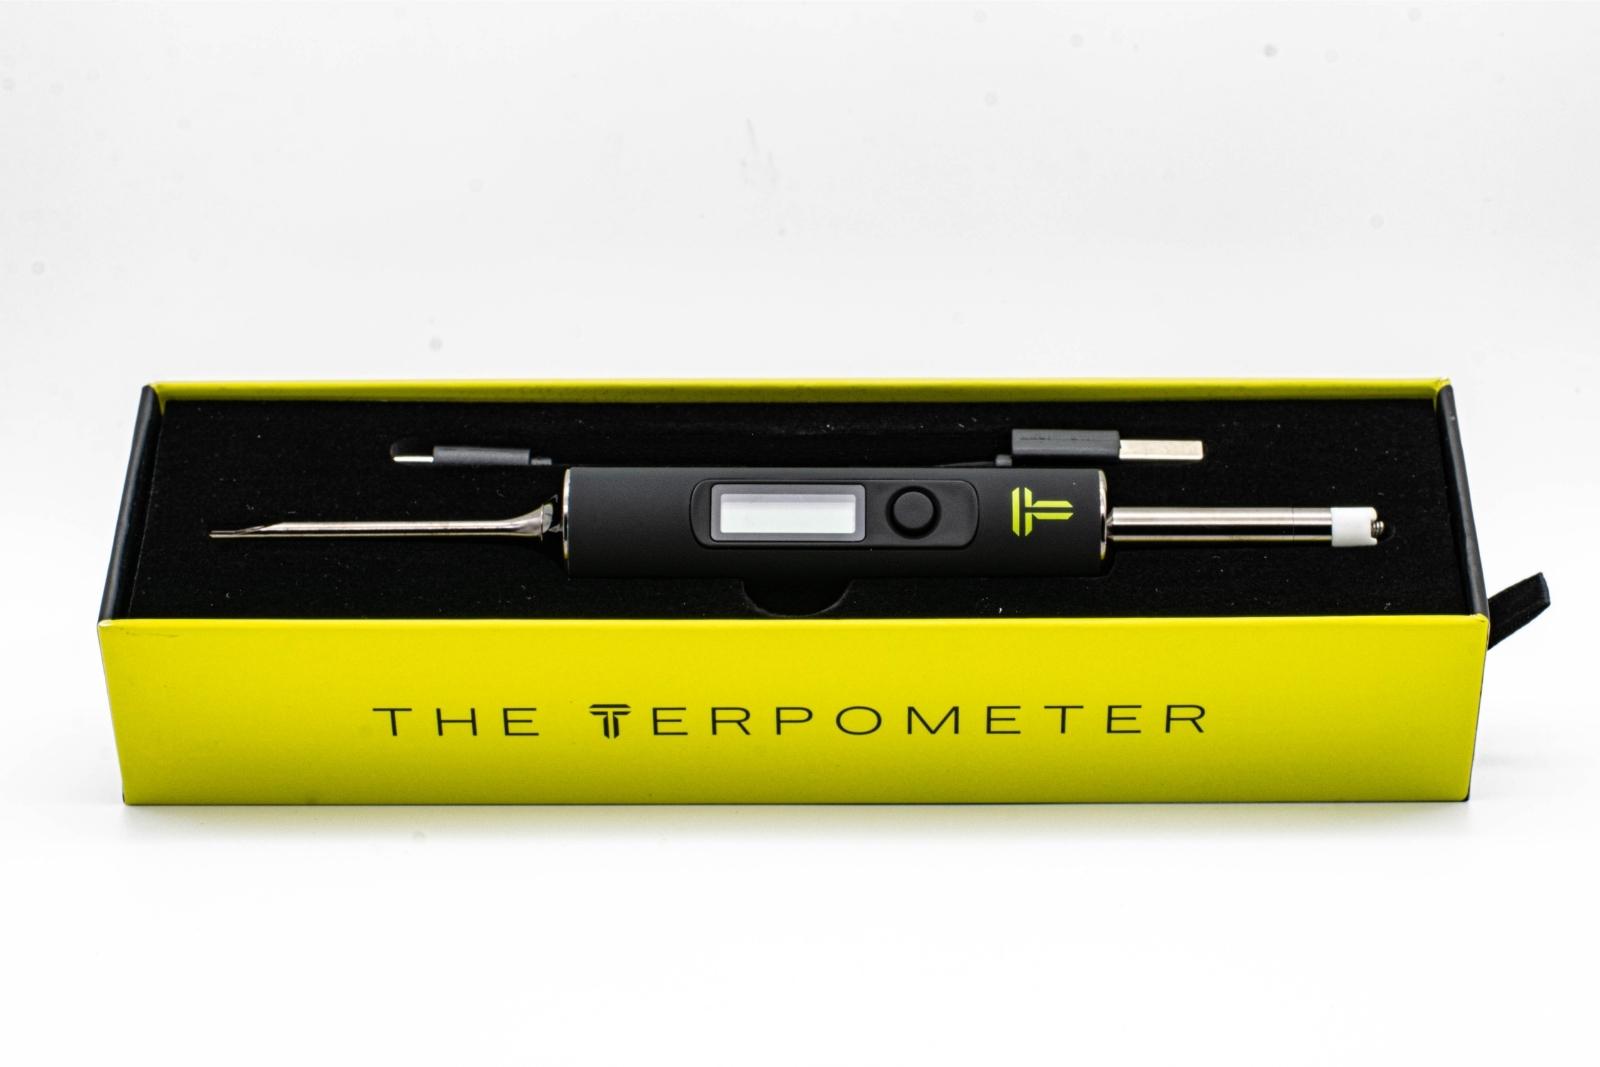 The Terpometer inside its box on a white background